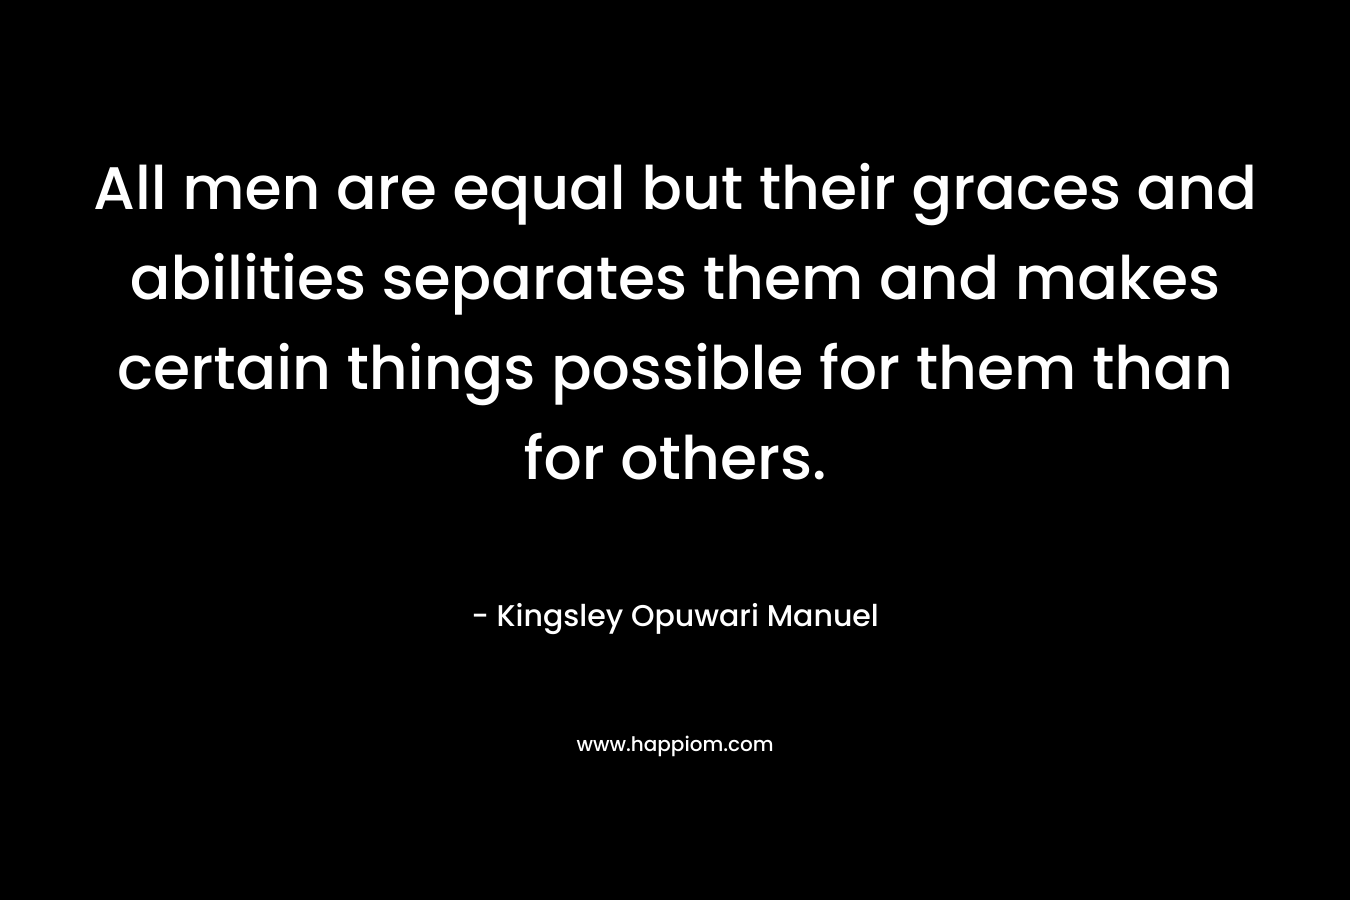 All men are equal but their graces and abilities separates them and makes certain things possible for them than for others. – Kingsley Opuwari Manuel